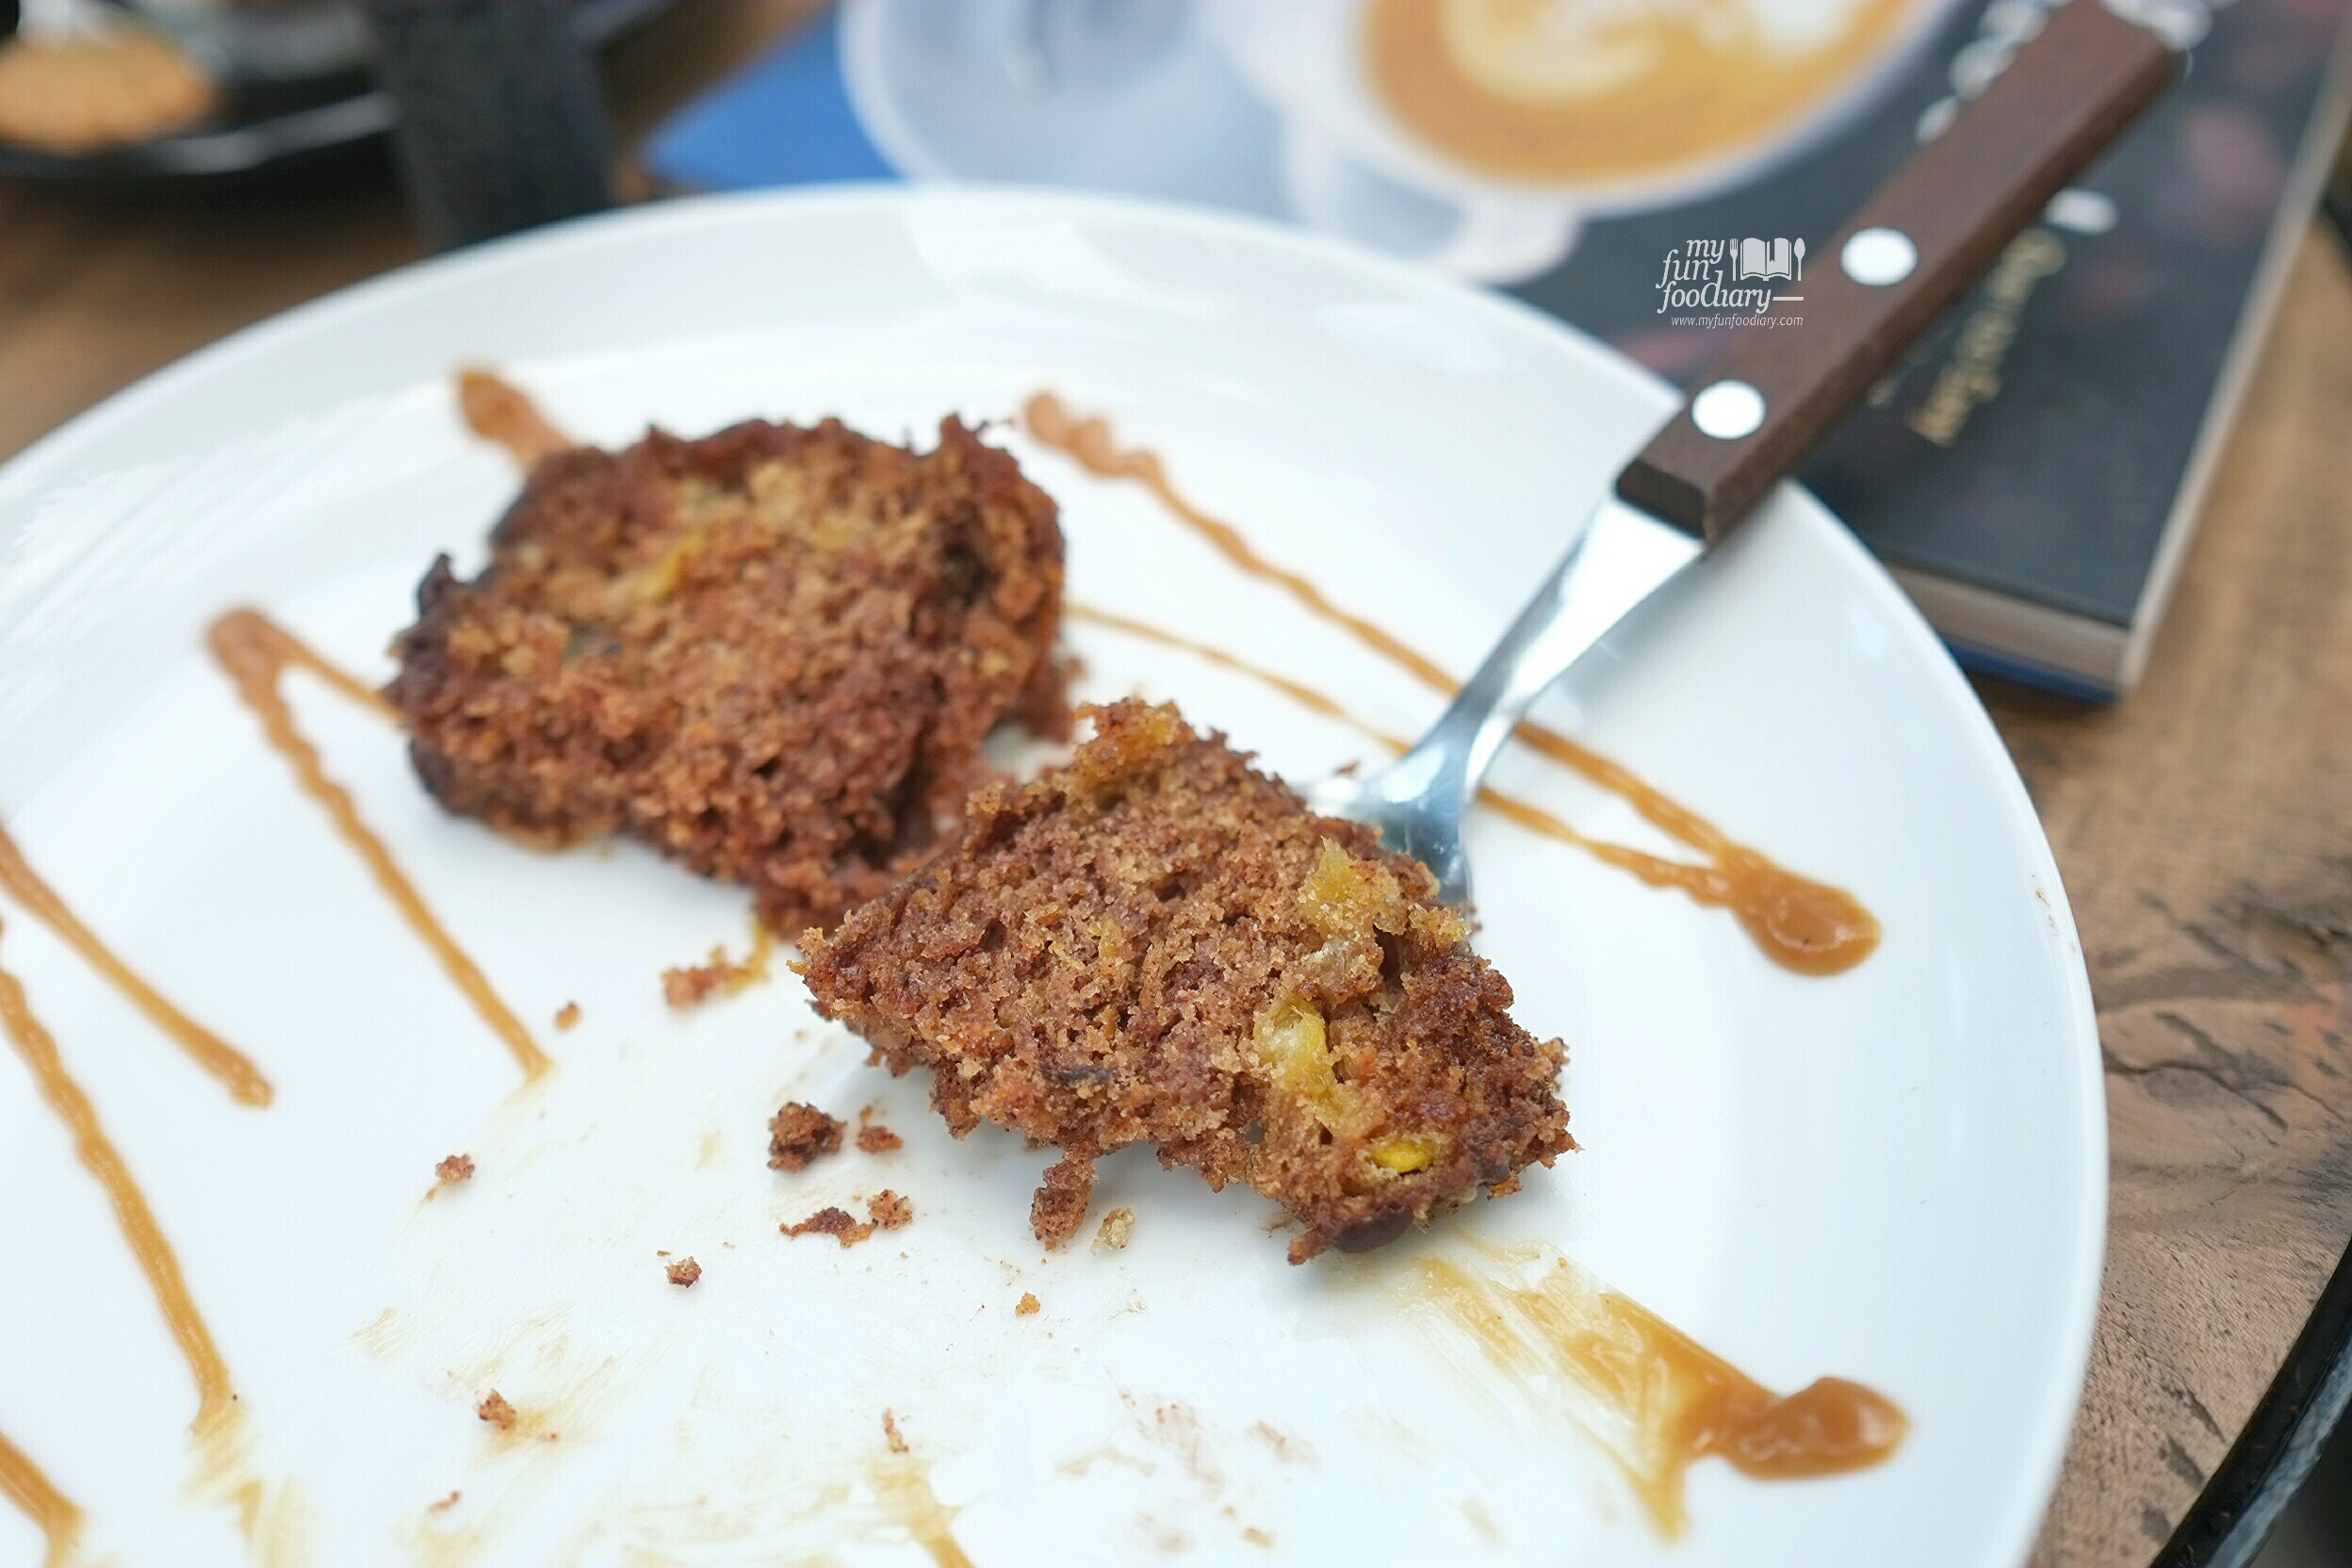 Love The Carrot Cake at Blue Doors Bandung by Myfunfoodiary